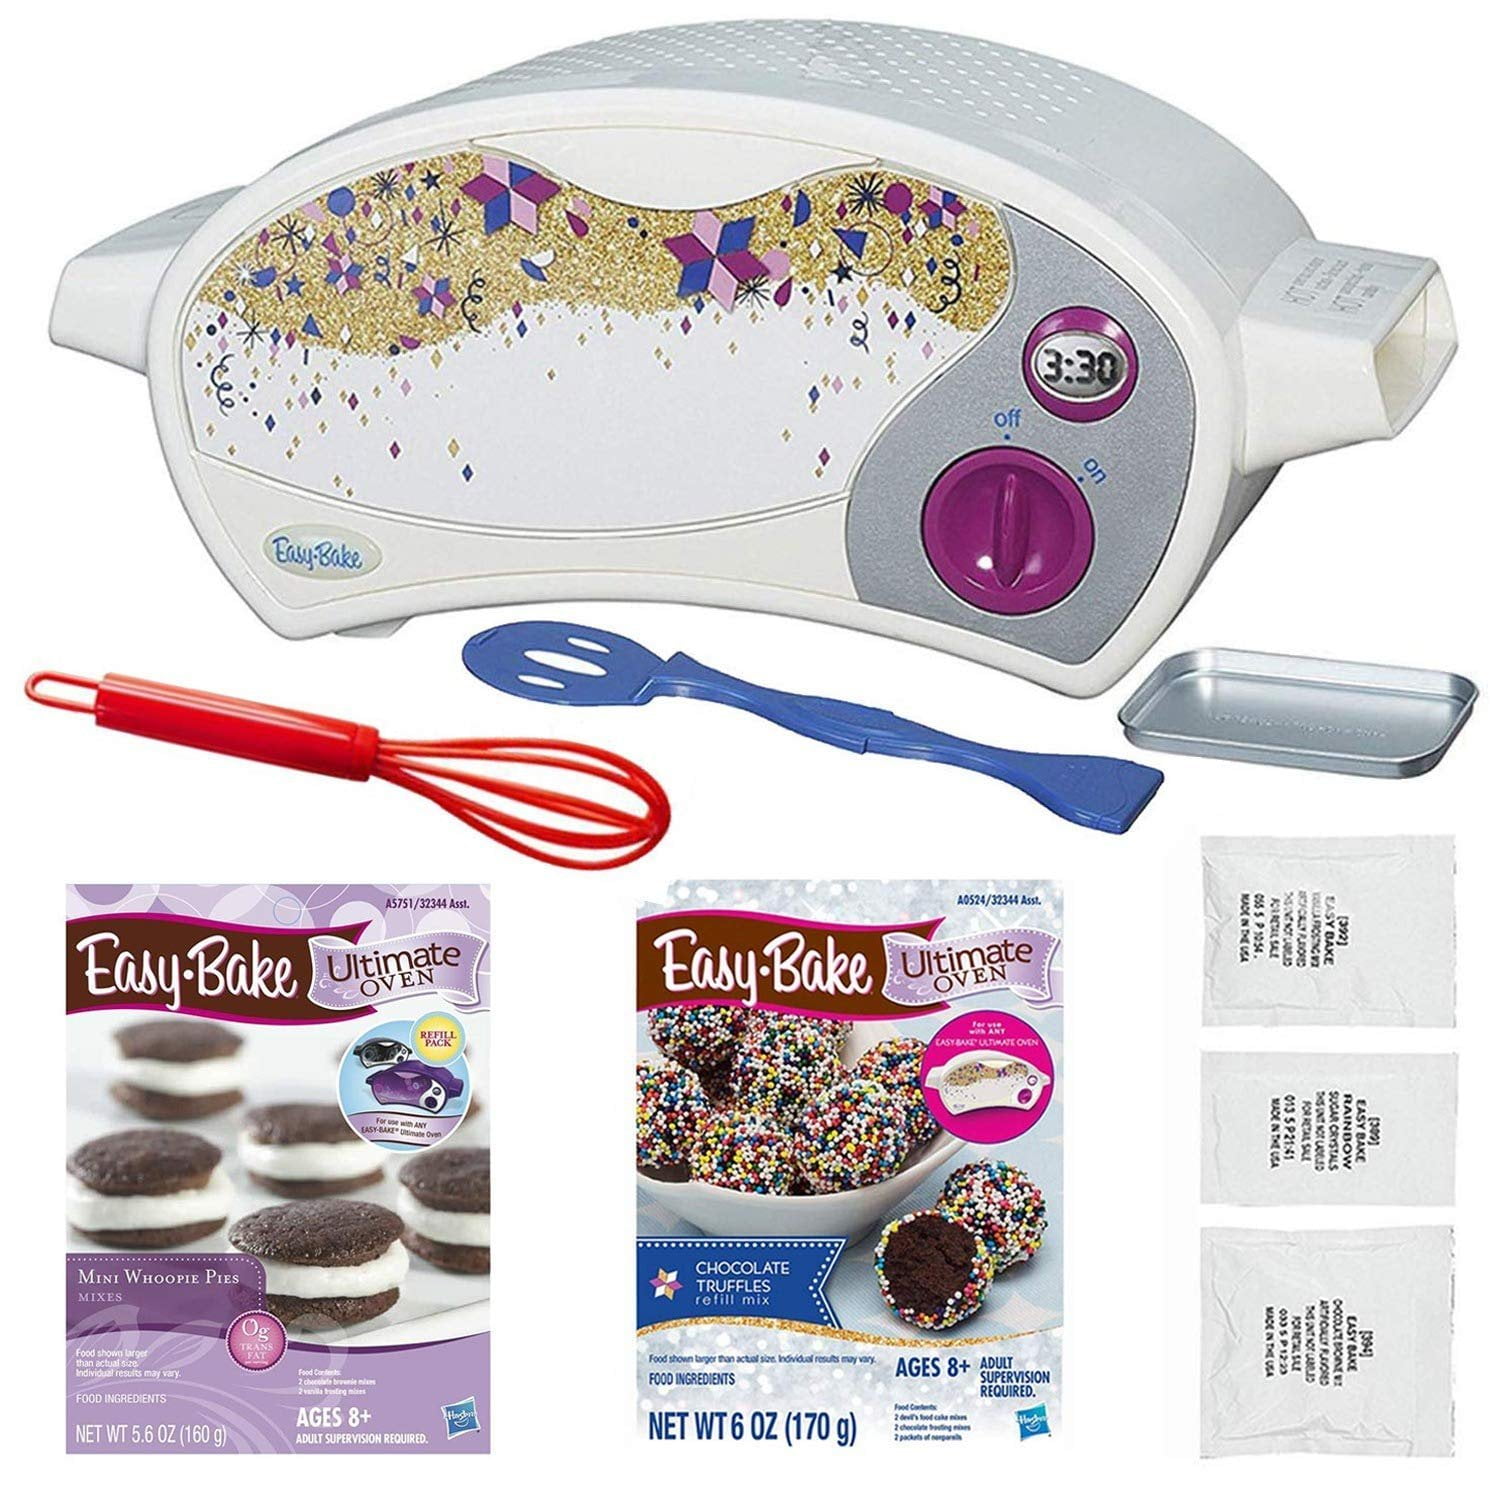 Fun 2 Bake Children's Toy Oven With Accessories To2708 for sale online 